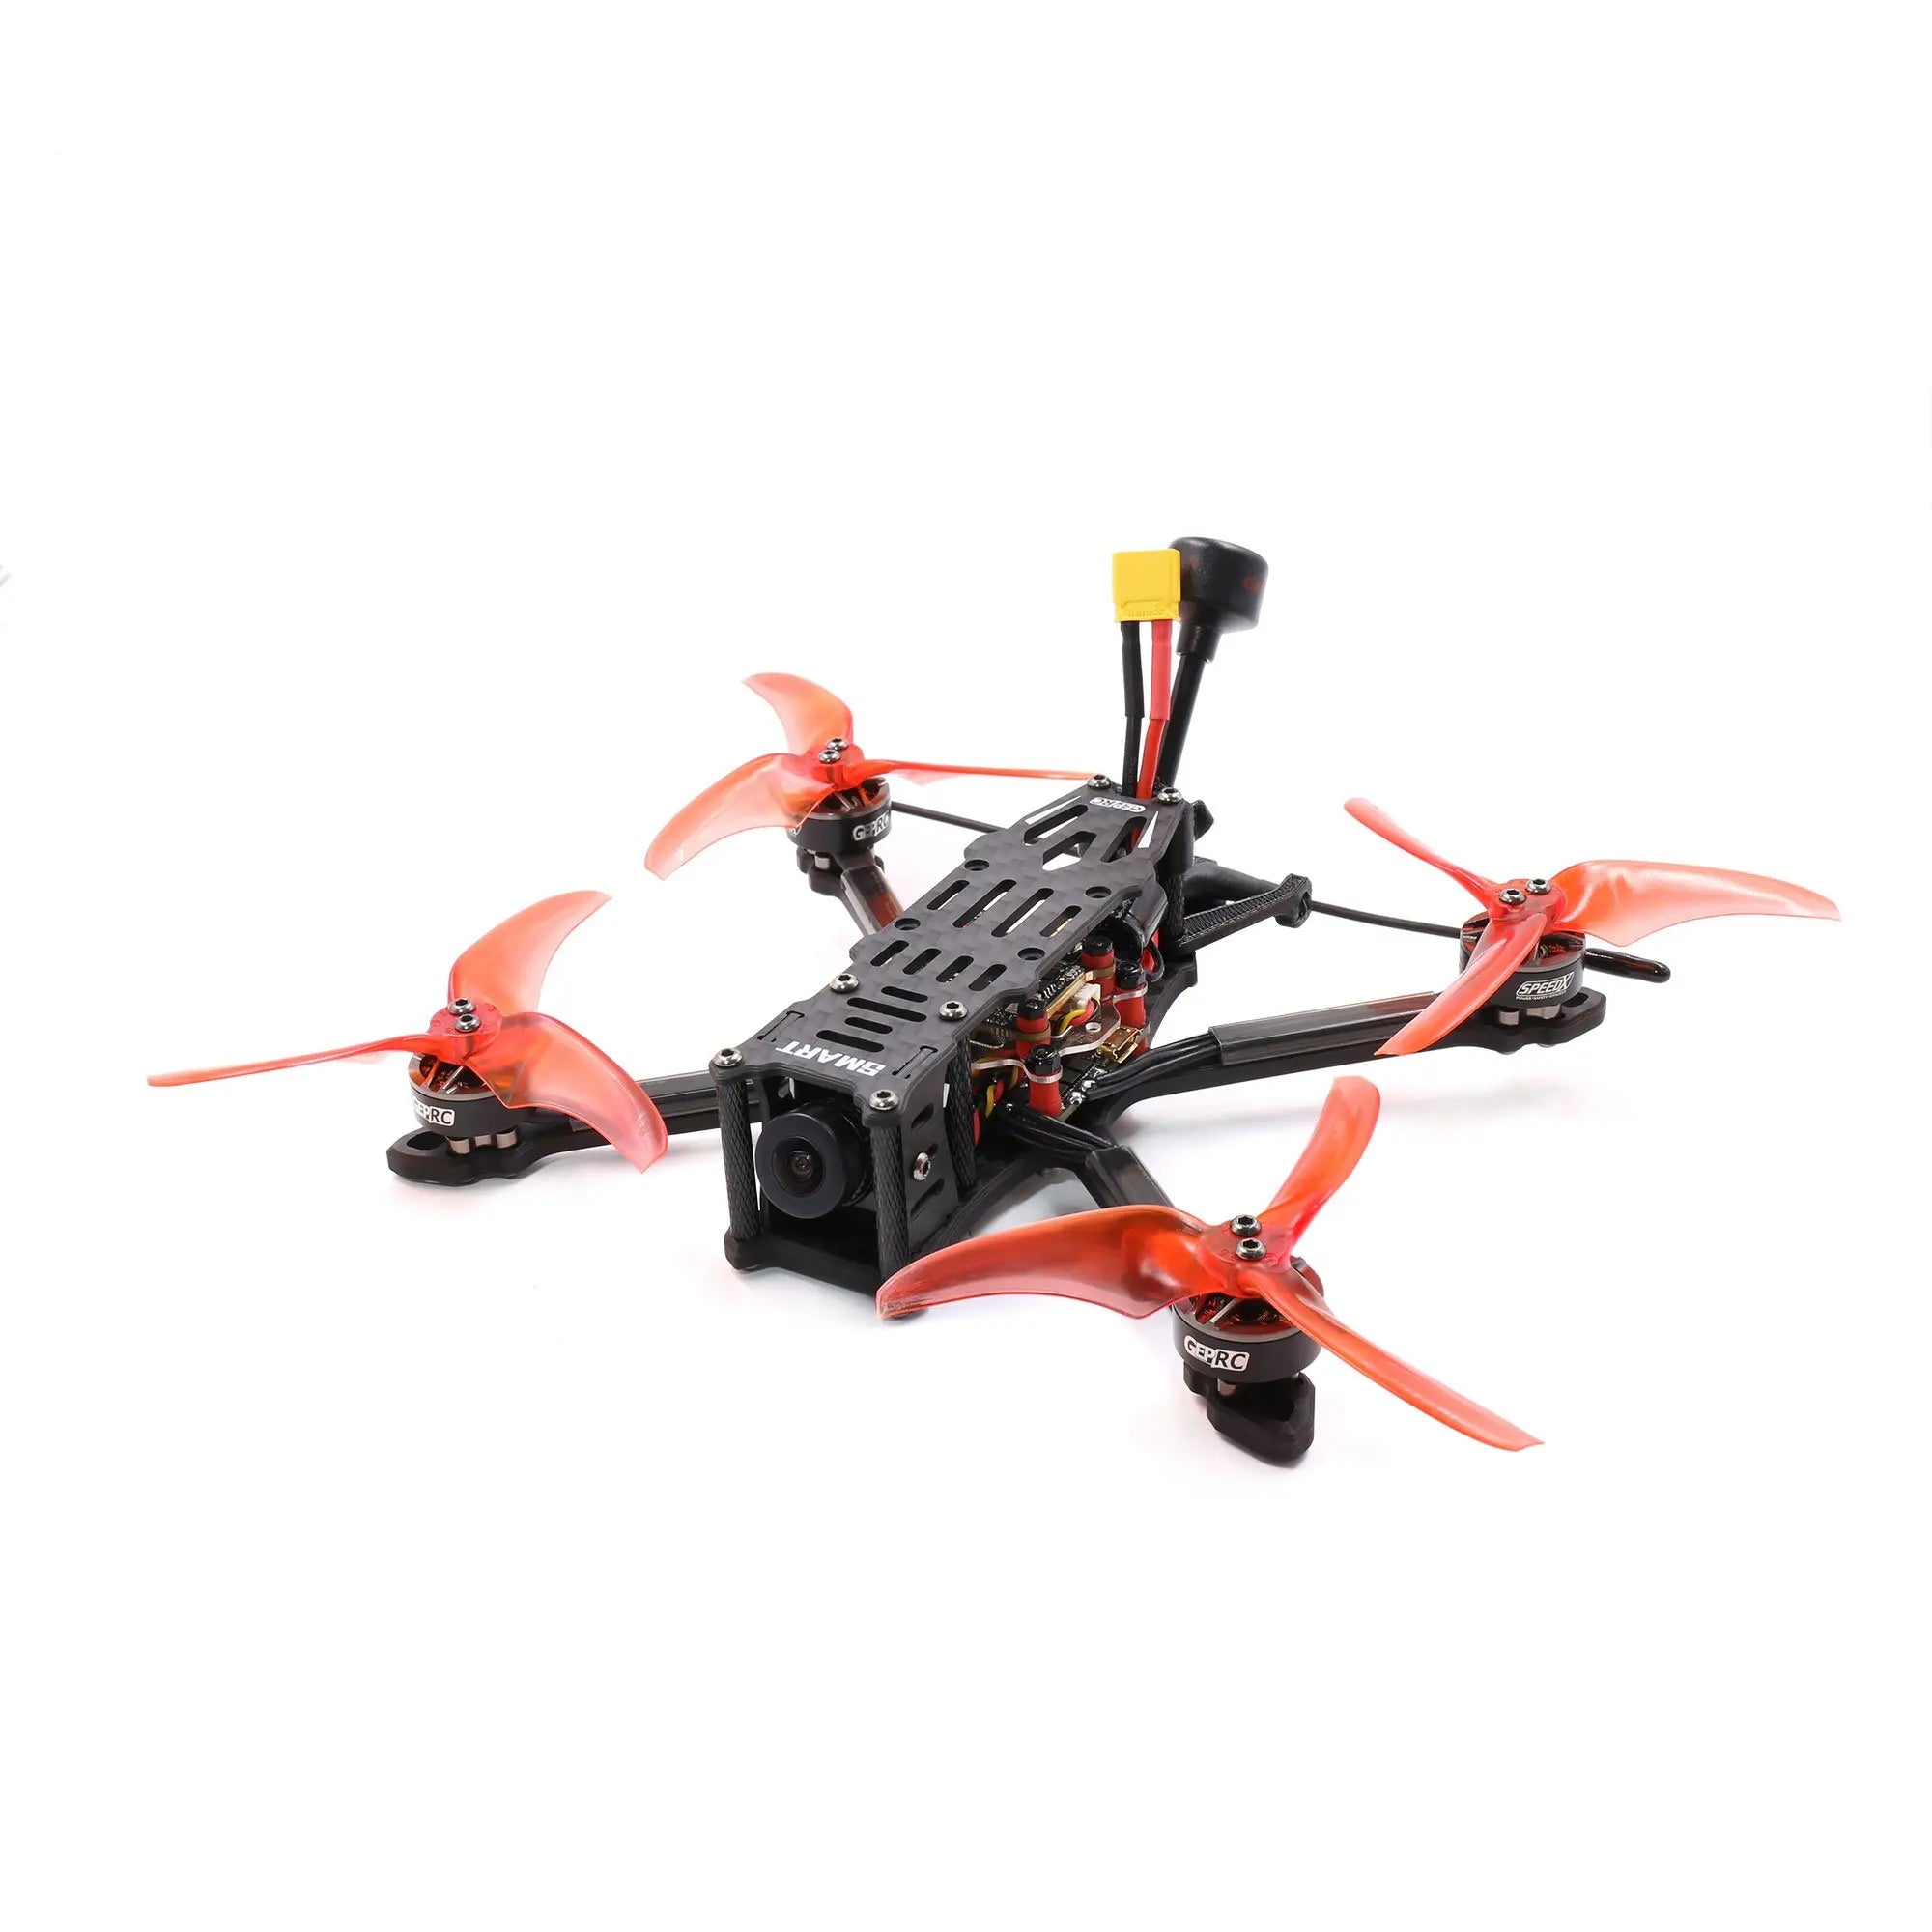 GEPRC SMART 35 FPV Drone, the GEPRC Phantom 35 HD Freestyle is an impressive product that delivers high-quality video